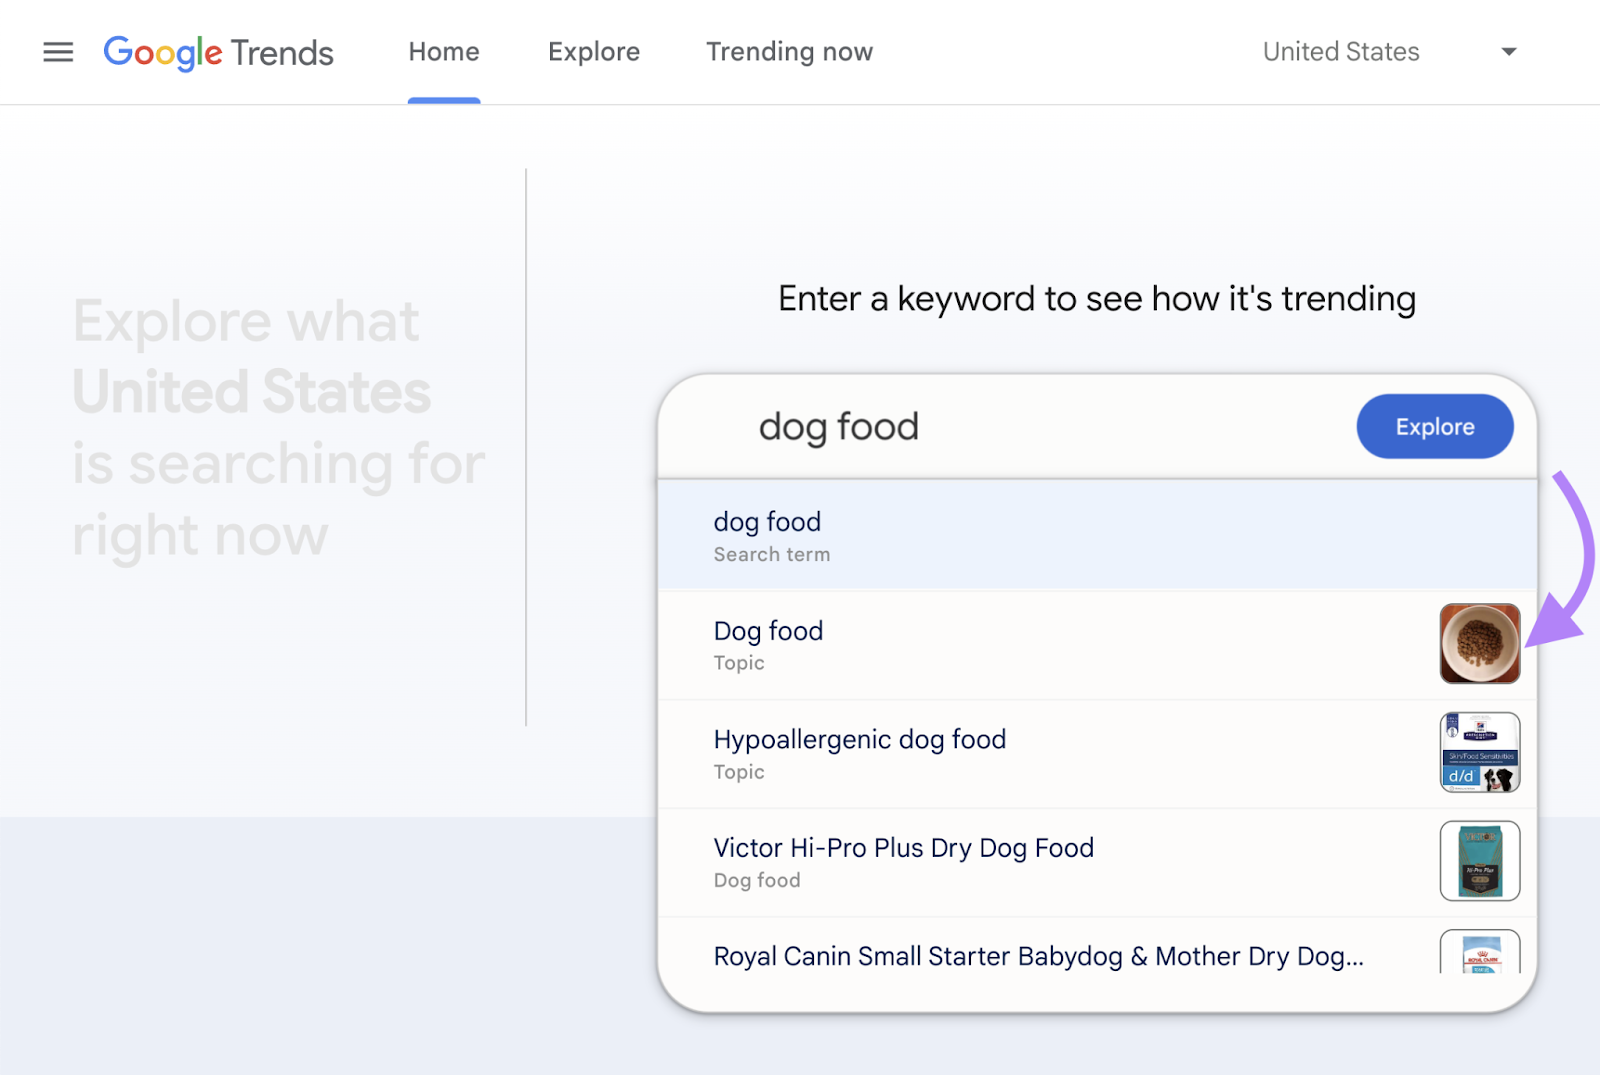 Searching for " food" keyword over the past 30 days in Google Trends